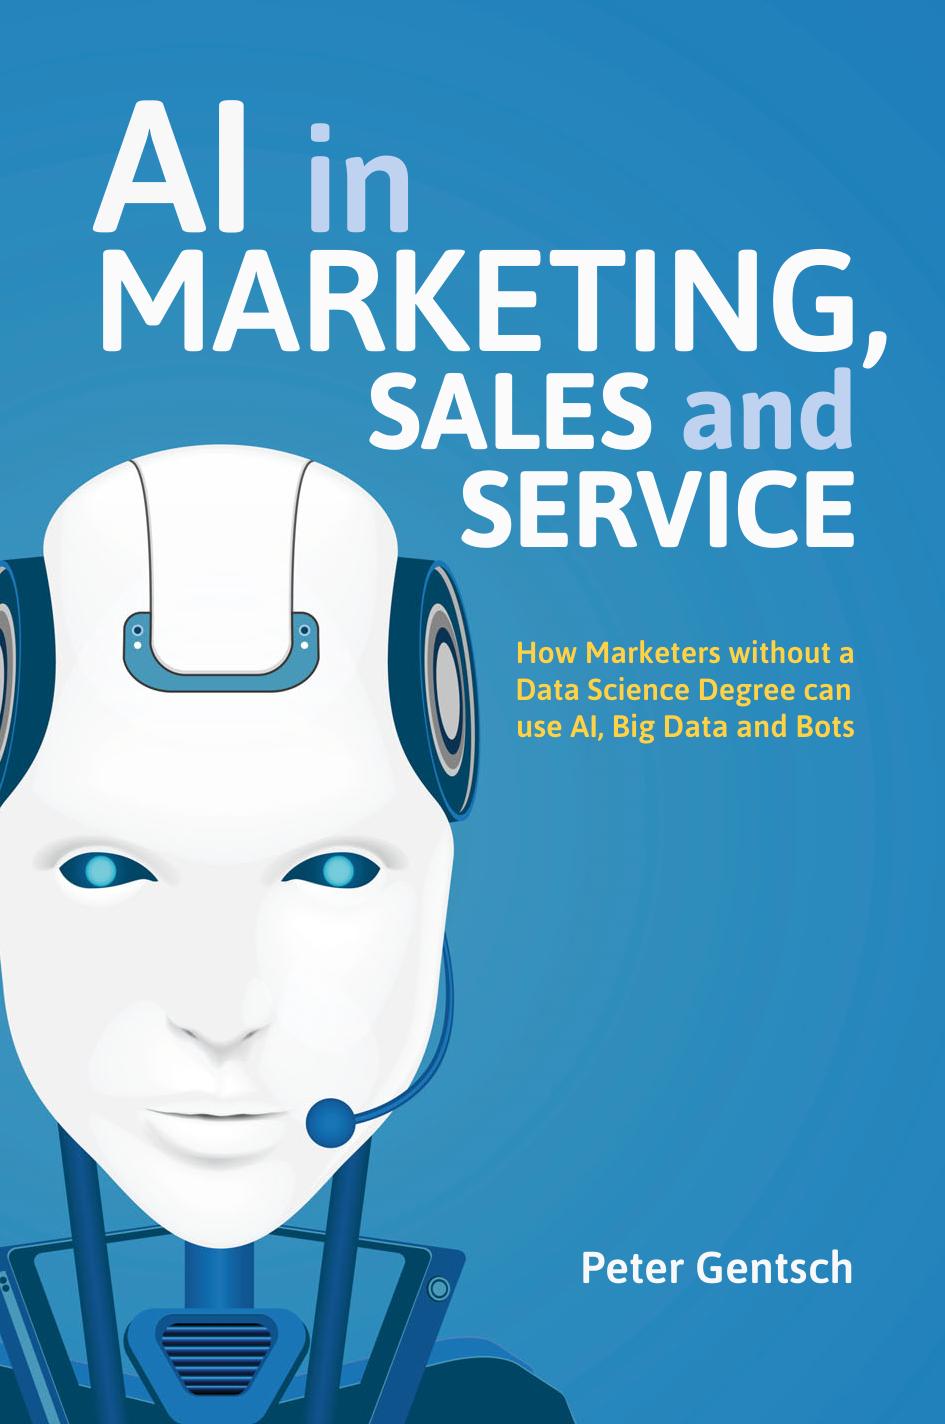 AI in Marketing, Sales and Service  How Marketers without a Data Science Degree can use AI, Big Data and Bots ( PDFDrive ) 2019